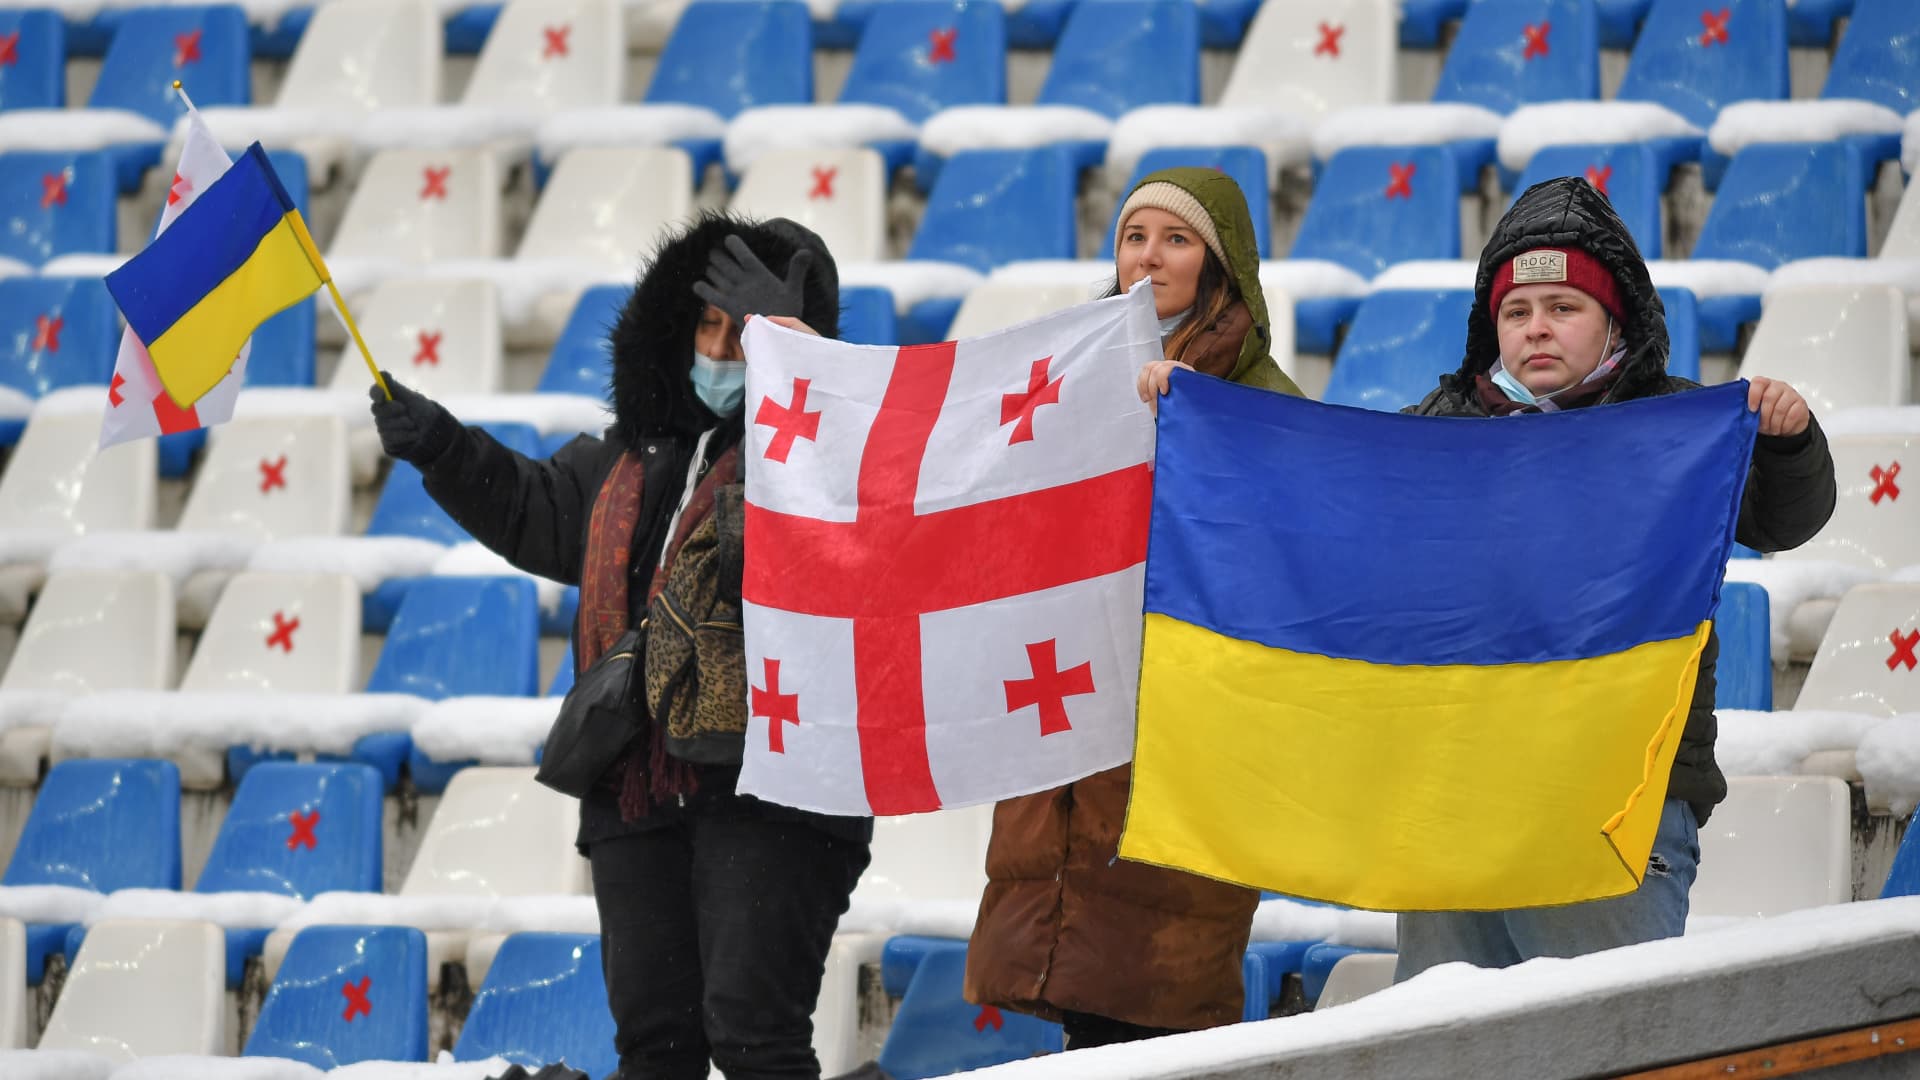 Fans waving the flags of Ukraine and Georgia at a match between Georgia and Spain at the Rugby Europe International Championship on March 20 in Tbilisi, Georgia. Russia fought a war with Georgia in 2008, after which it recognized as independent the breakaway regions of South Ossetia and Abkhazia.